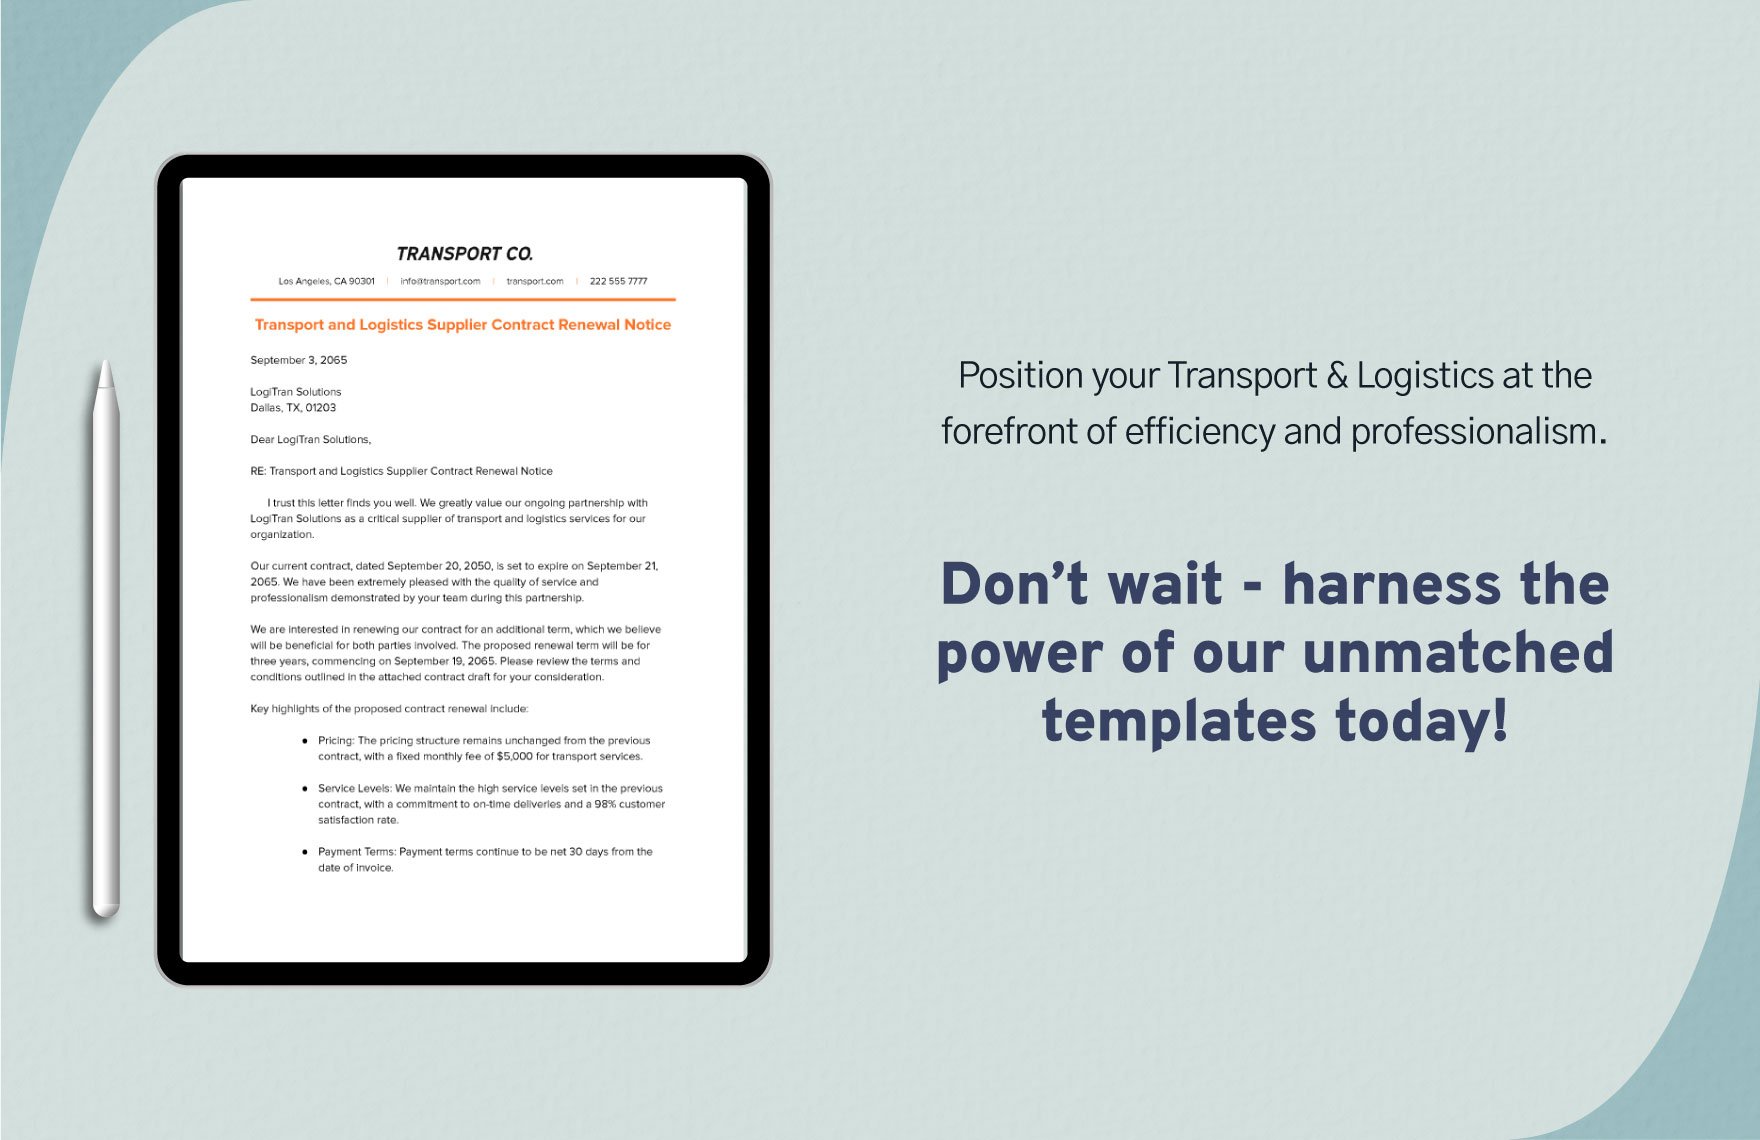 Transport and Logistics Supplier Contract Renewal Notice Template